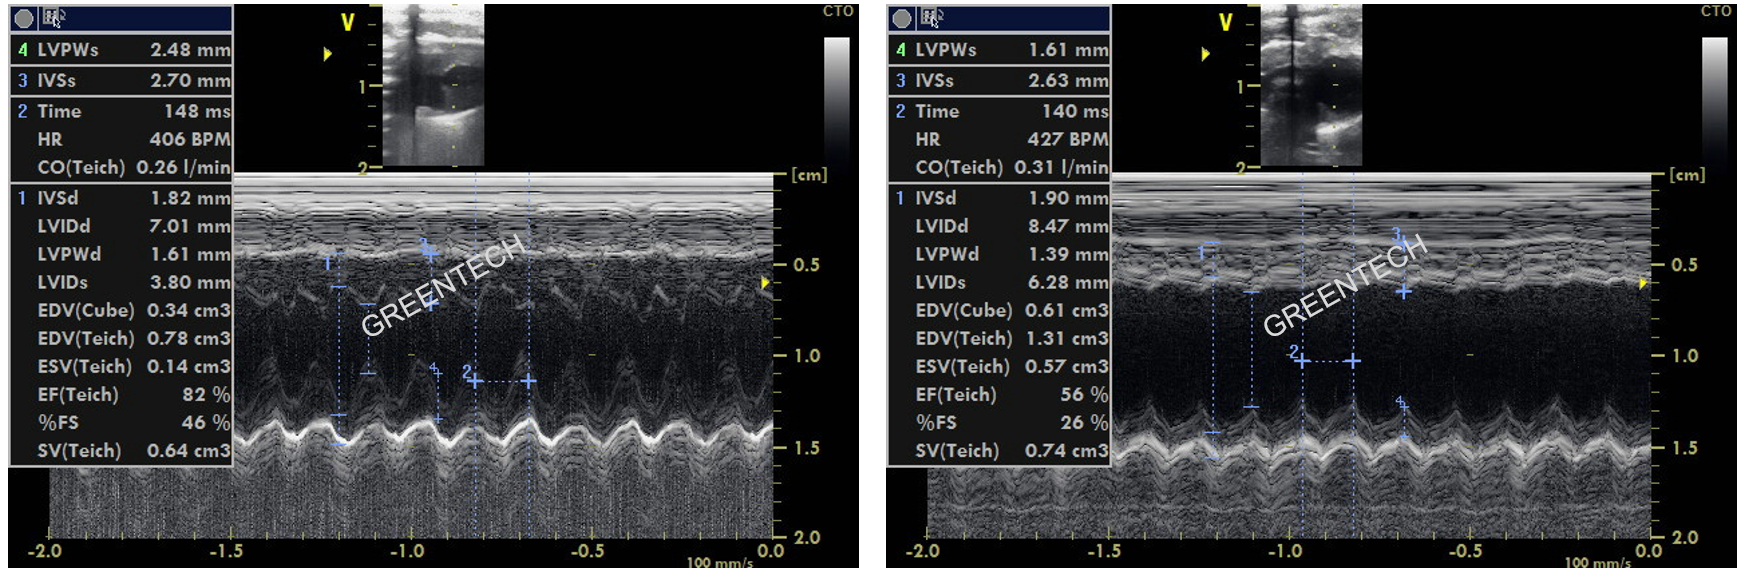 Echocardiographic measurements in SD rats before and one week after LAD ligation.png